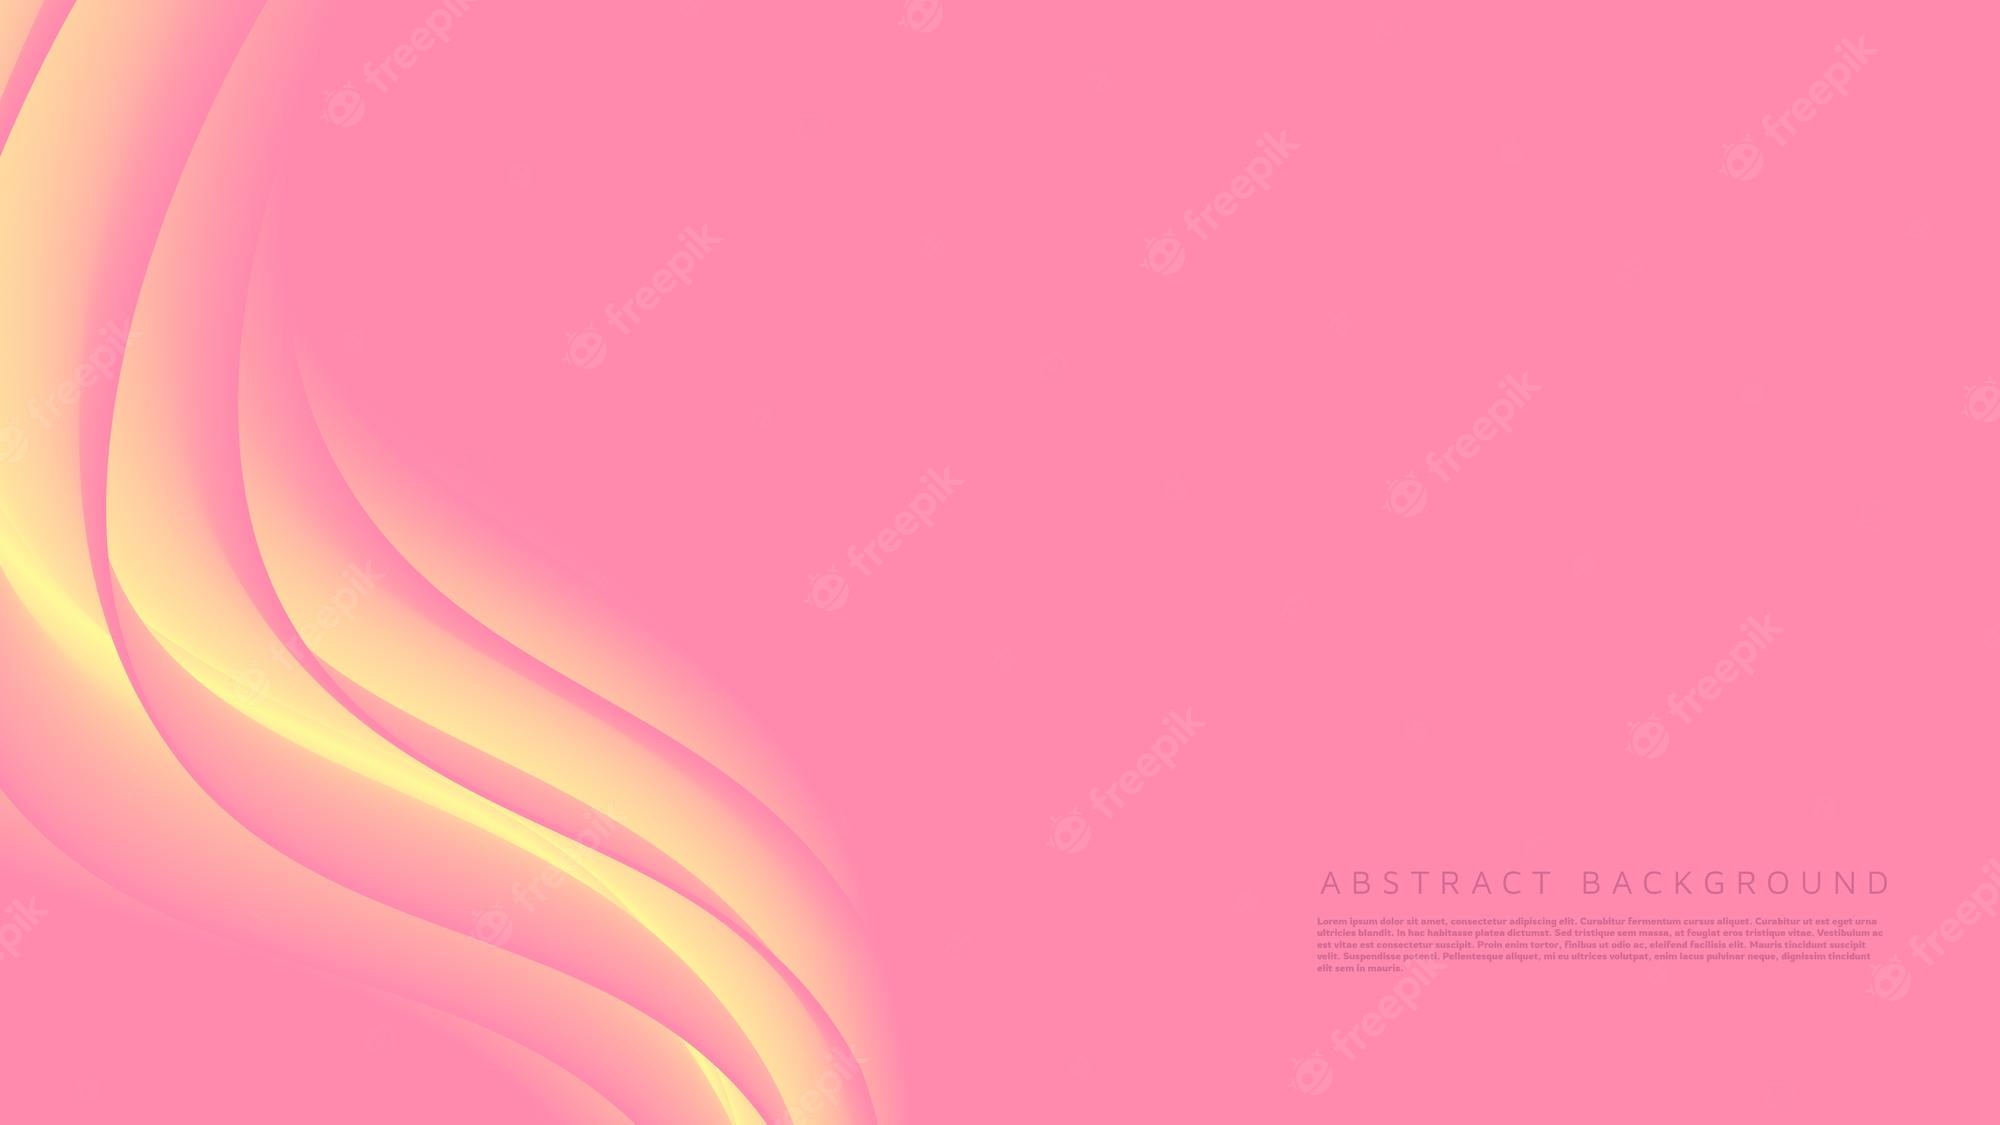 Abstract Laptop Wallpapers